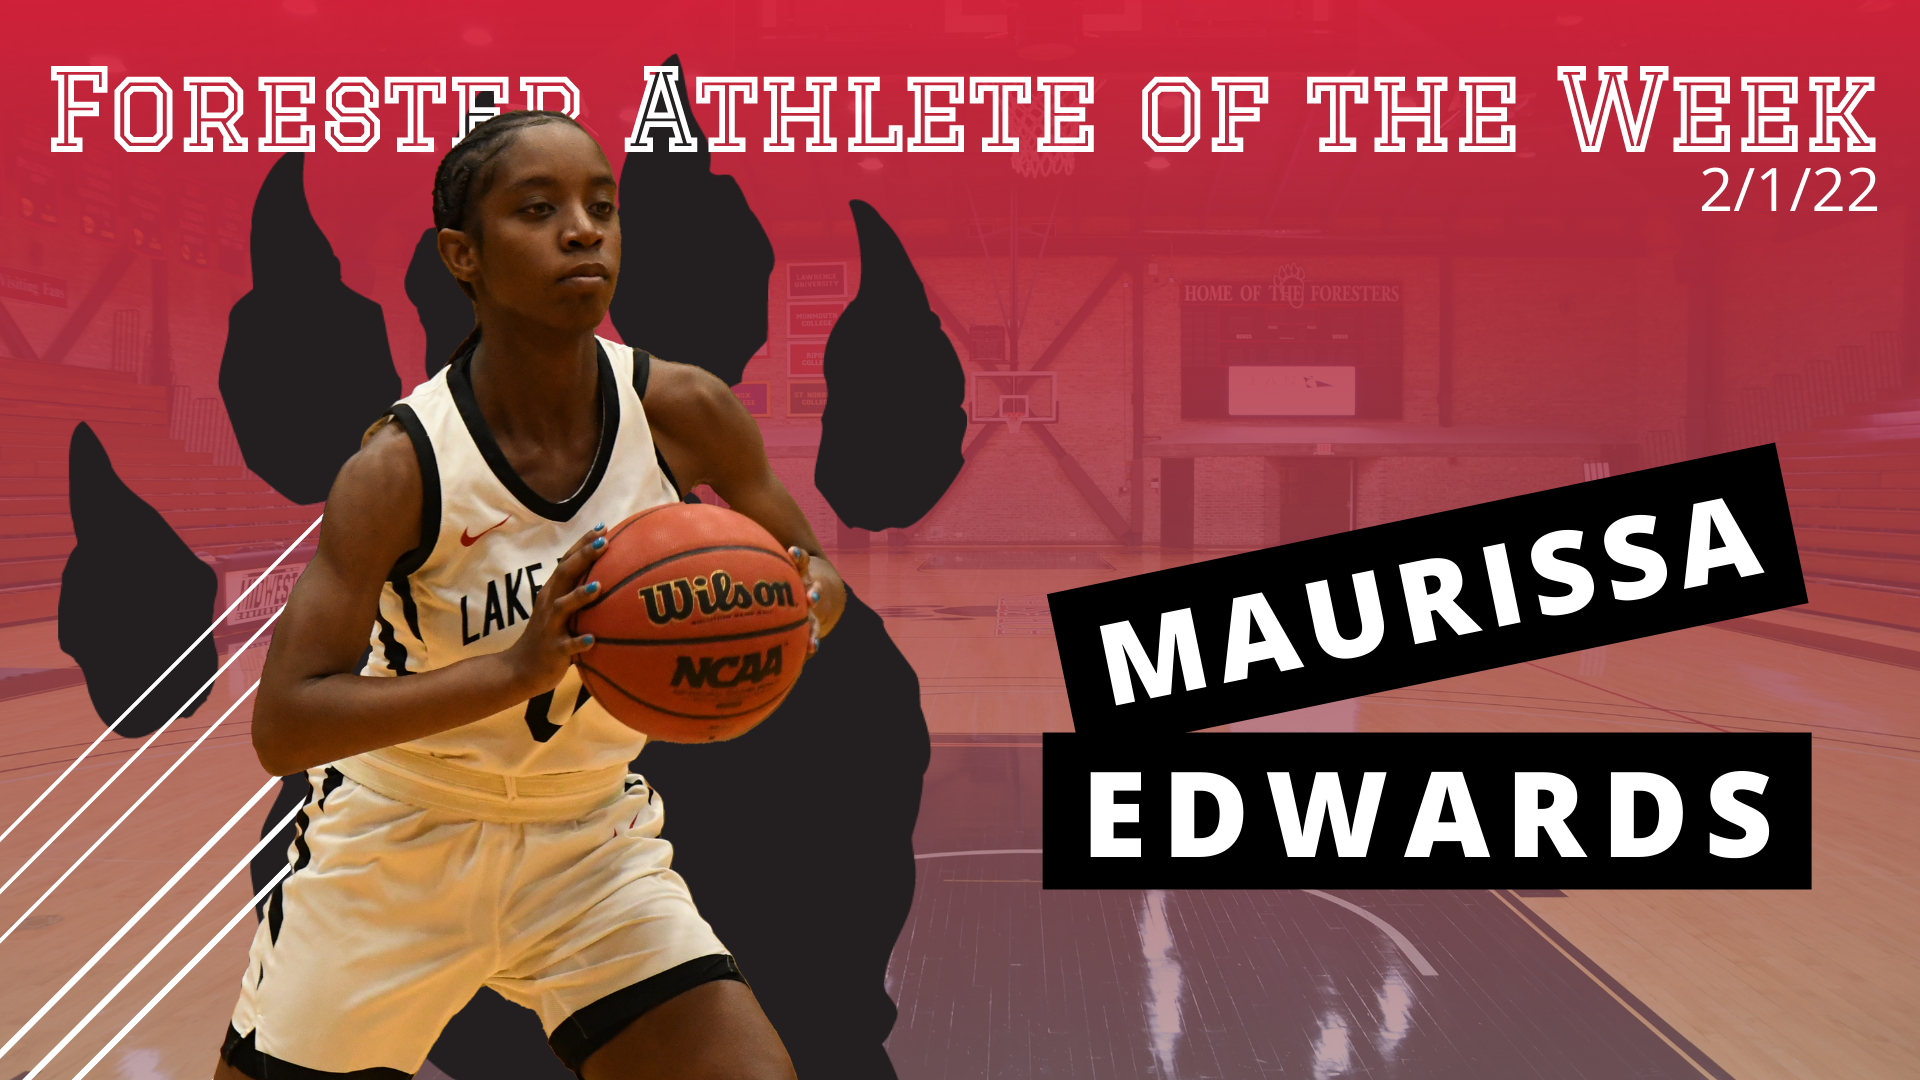 Maurissa Edwards Named Forester Athlete of the Week